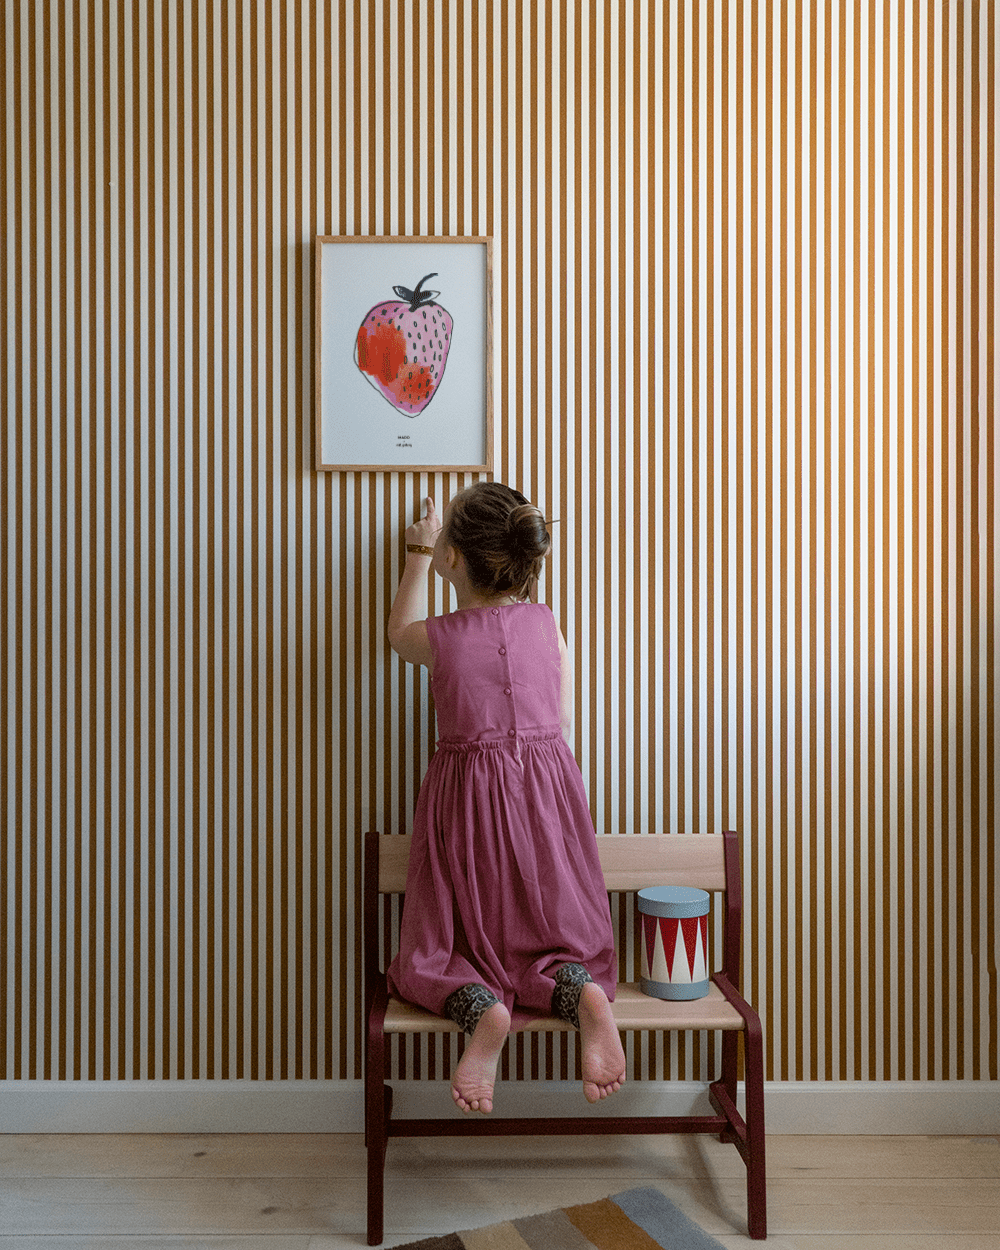 PAPER COLLECTIVE Poster Πόστερ, Strawberry, 30x40, Ροζ, Sustainable Paper, Paper Collective